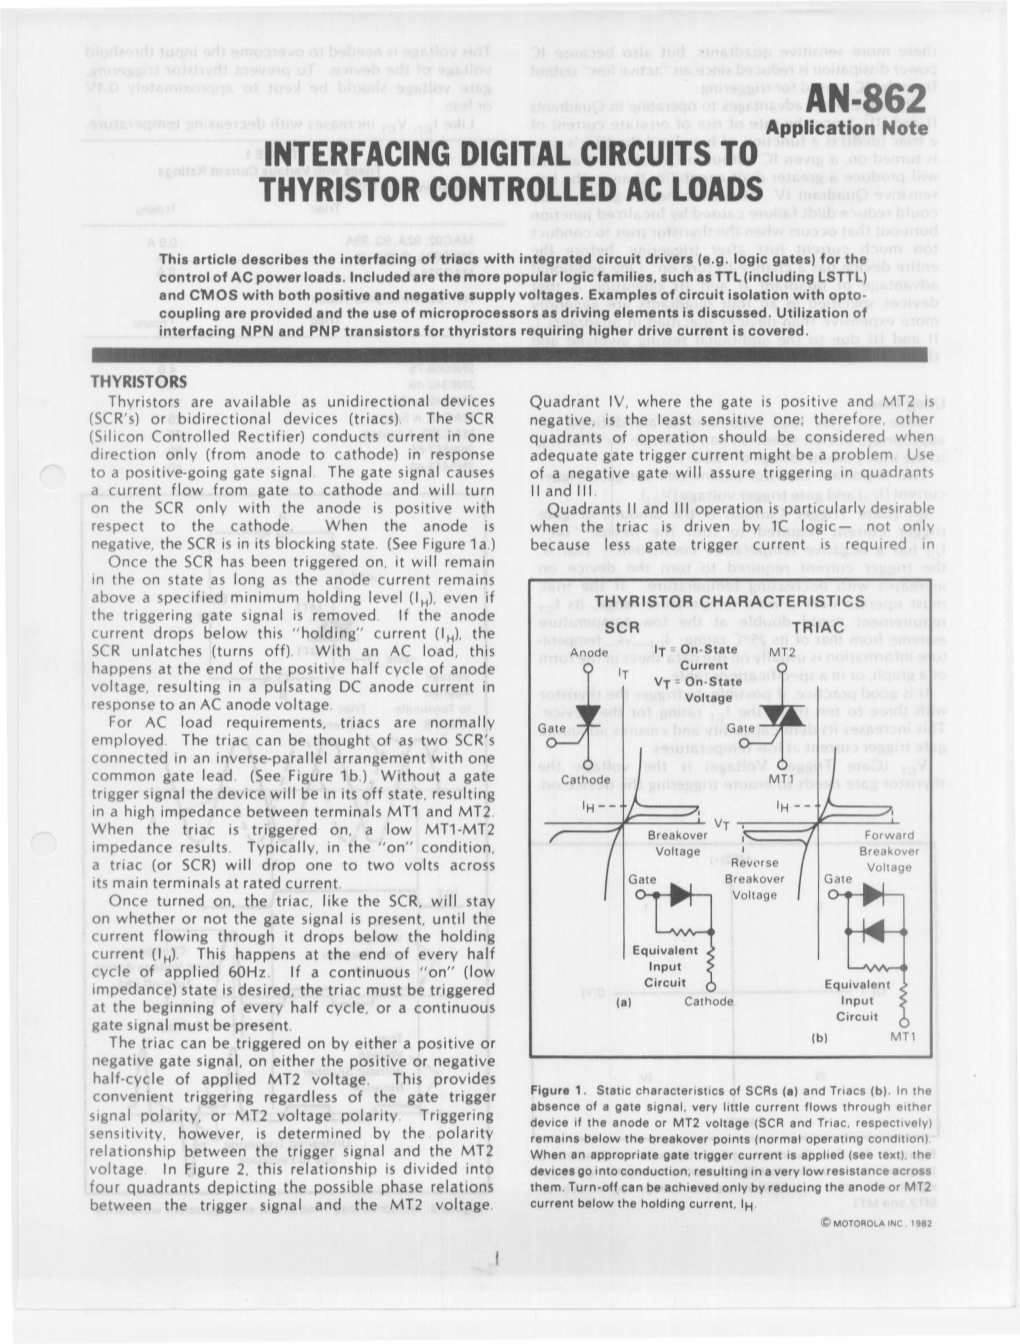 AN-862 Application Note INTERFACING DIGITAL CIRCUITS to THYRISTOR CONTROLLED AC LOADS